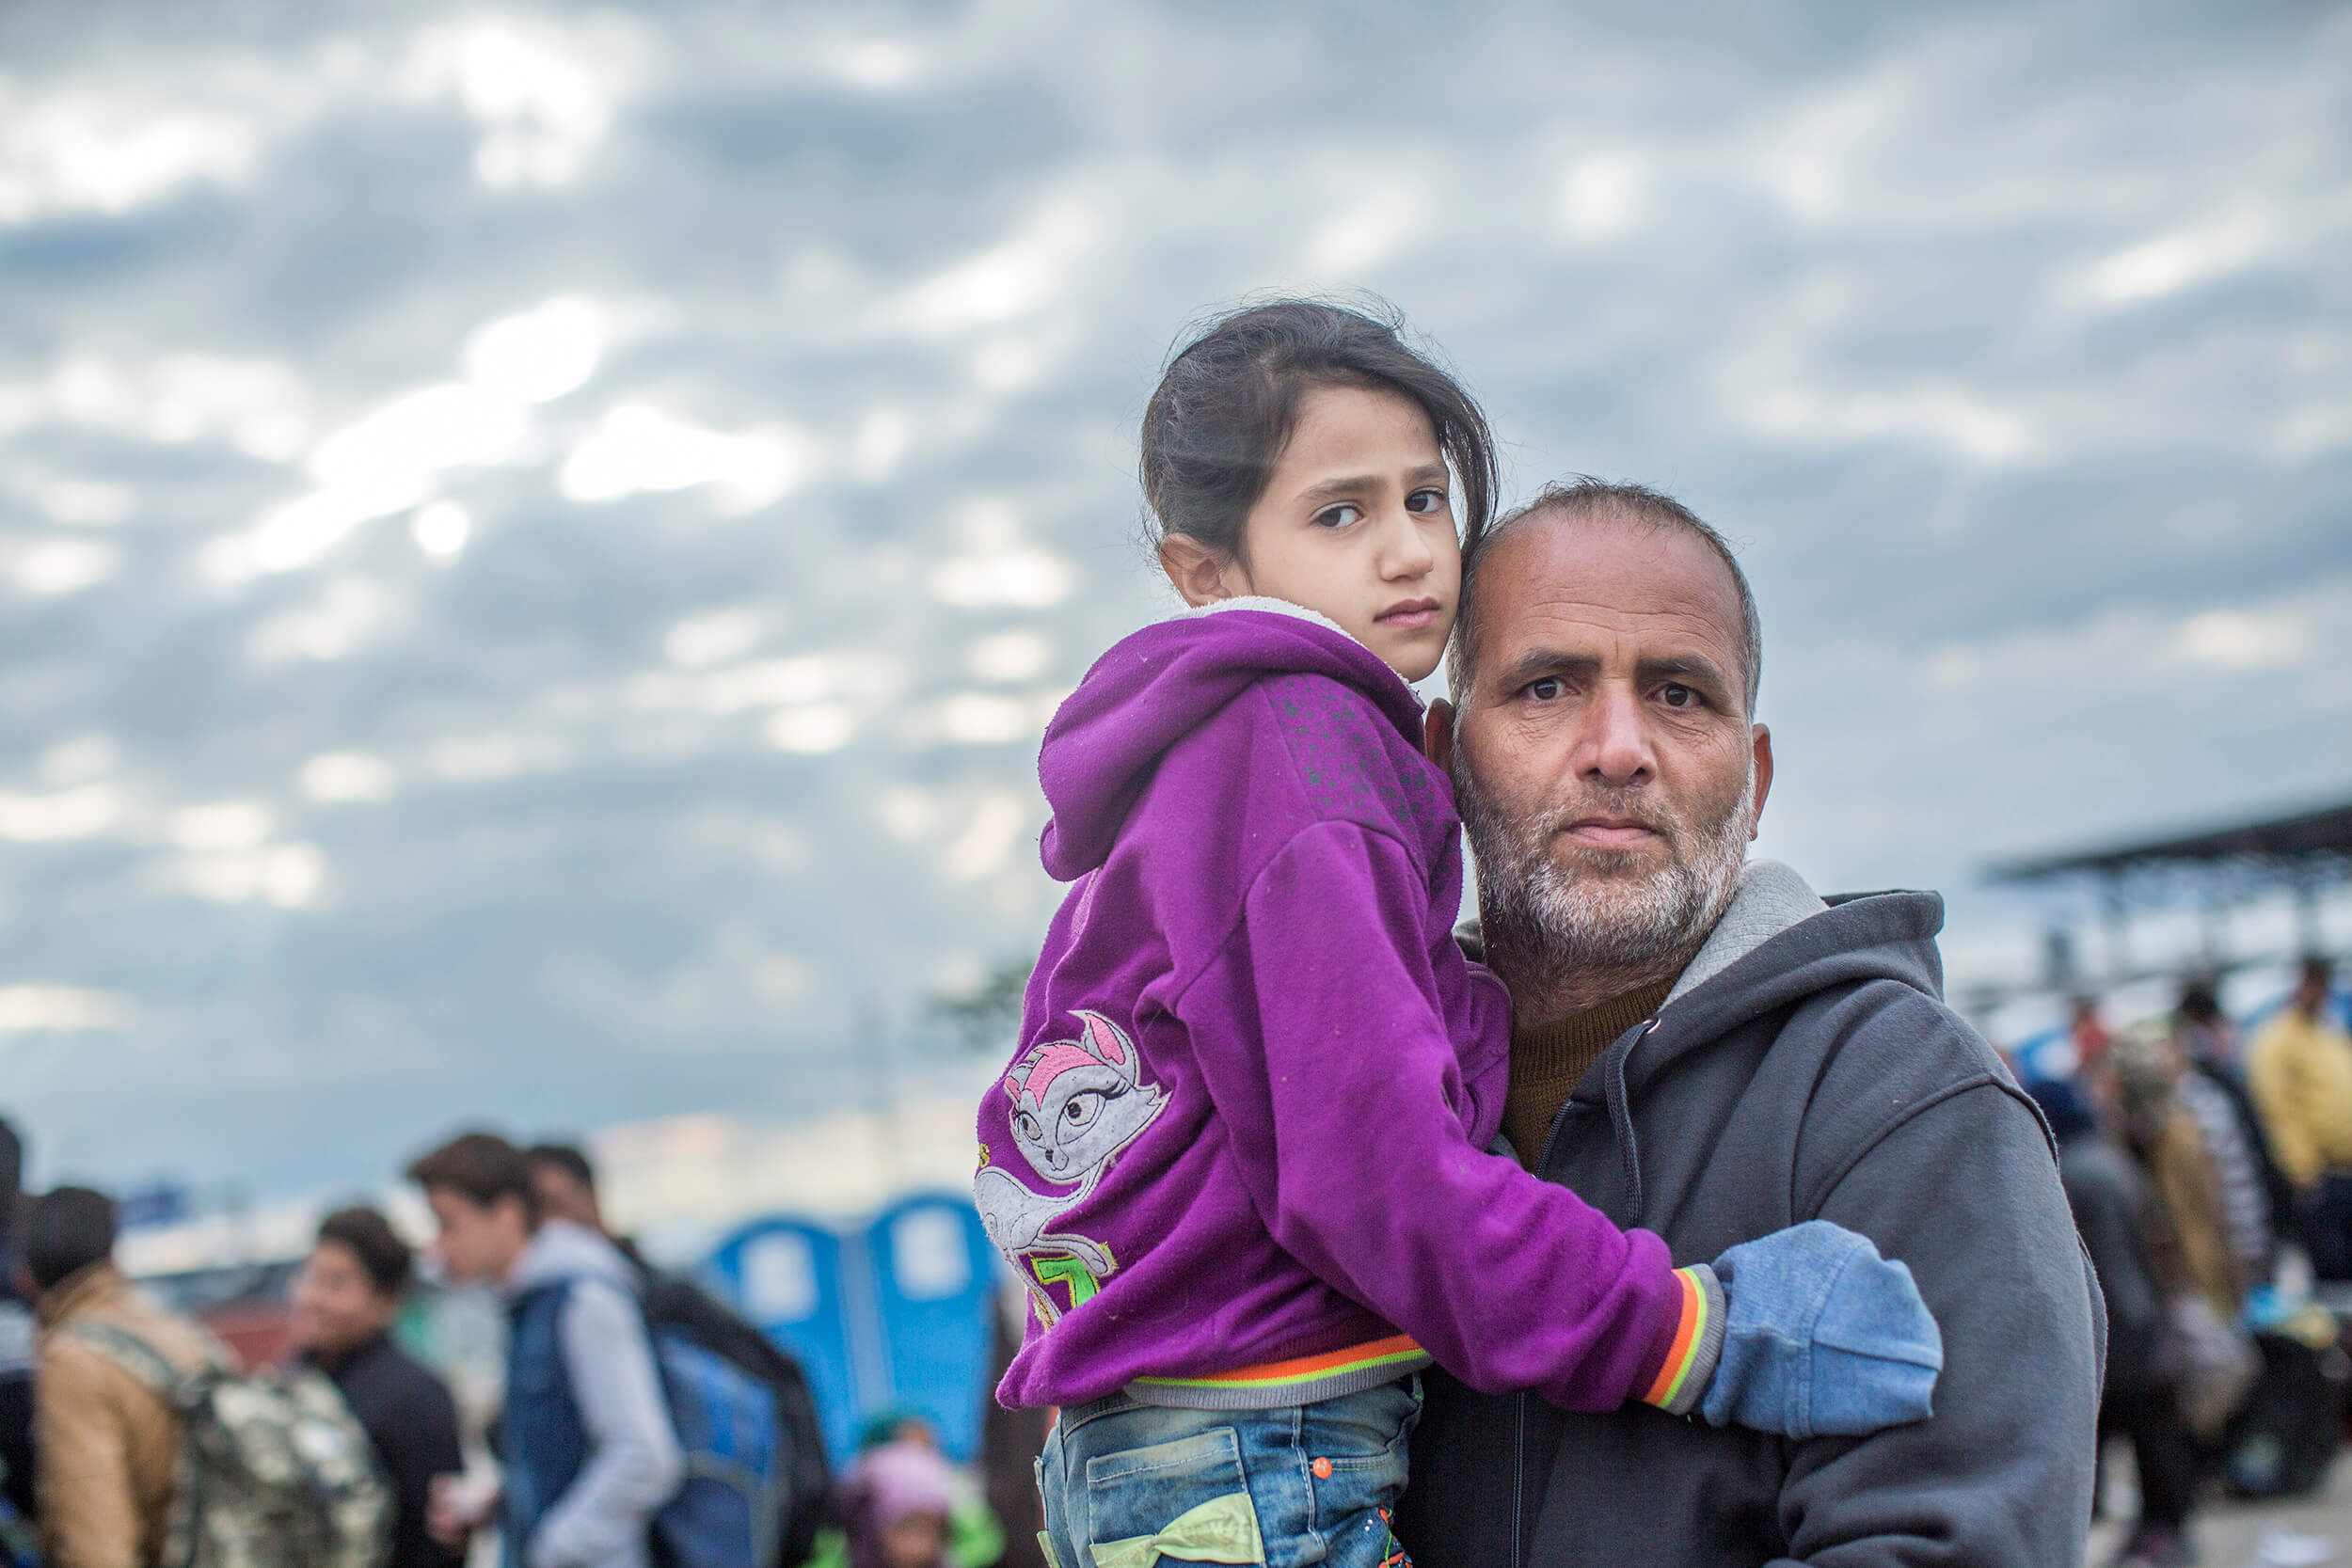  Austria, Nickelsdorf. October 2015.Nidal Awad, from Syria. Refugees from Syria, Afghanistan and Iraq arrive by train with his daughter to the Hungarian border station Hegyeshalom. 